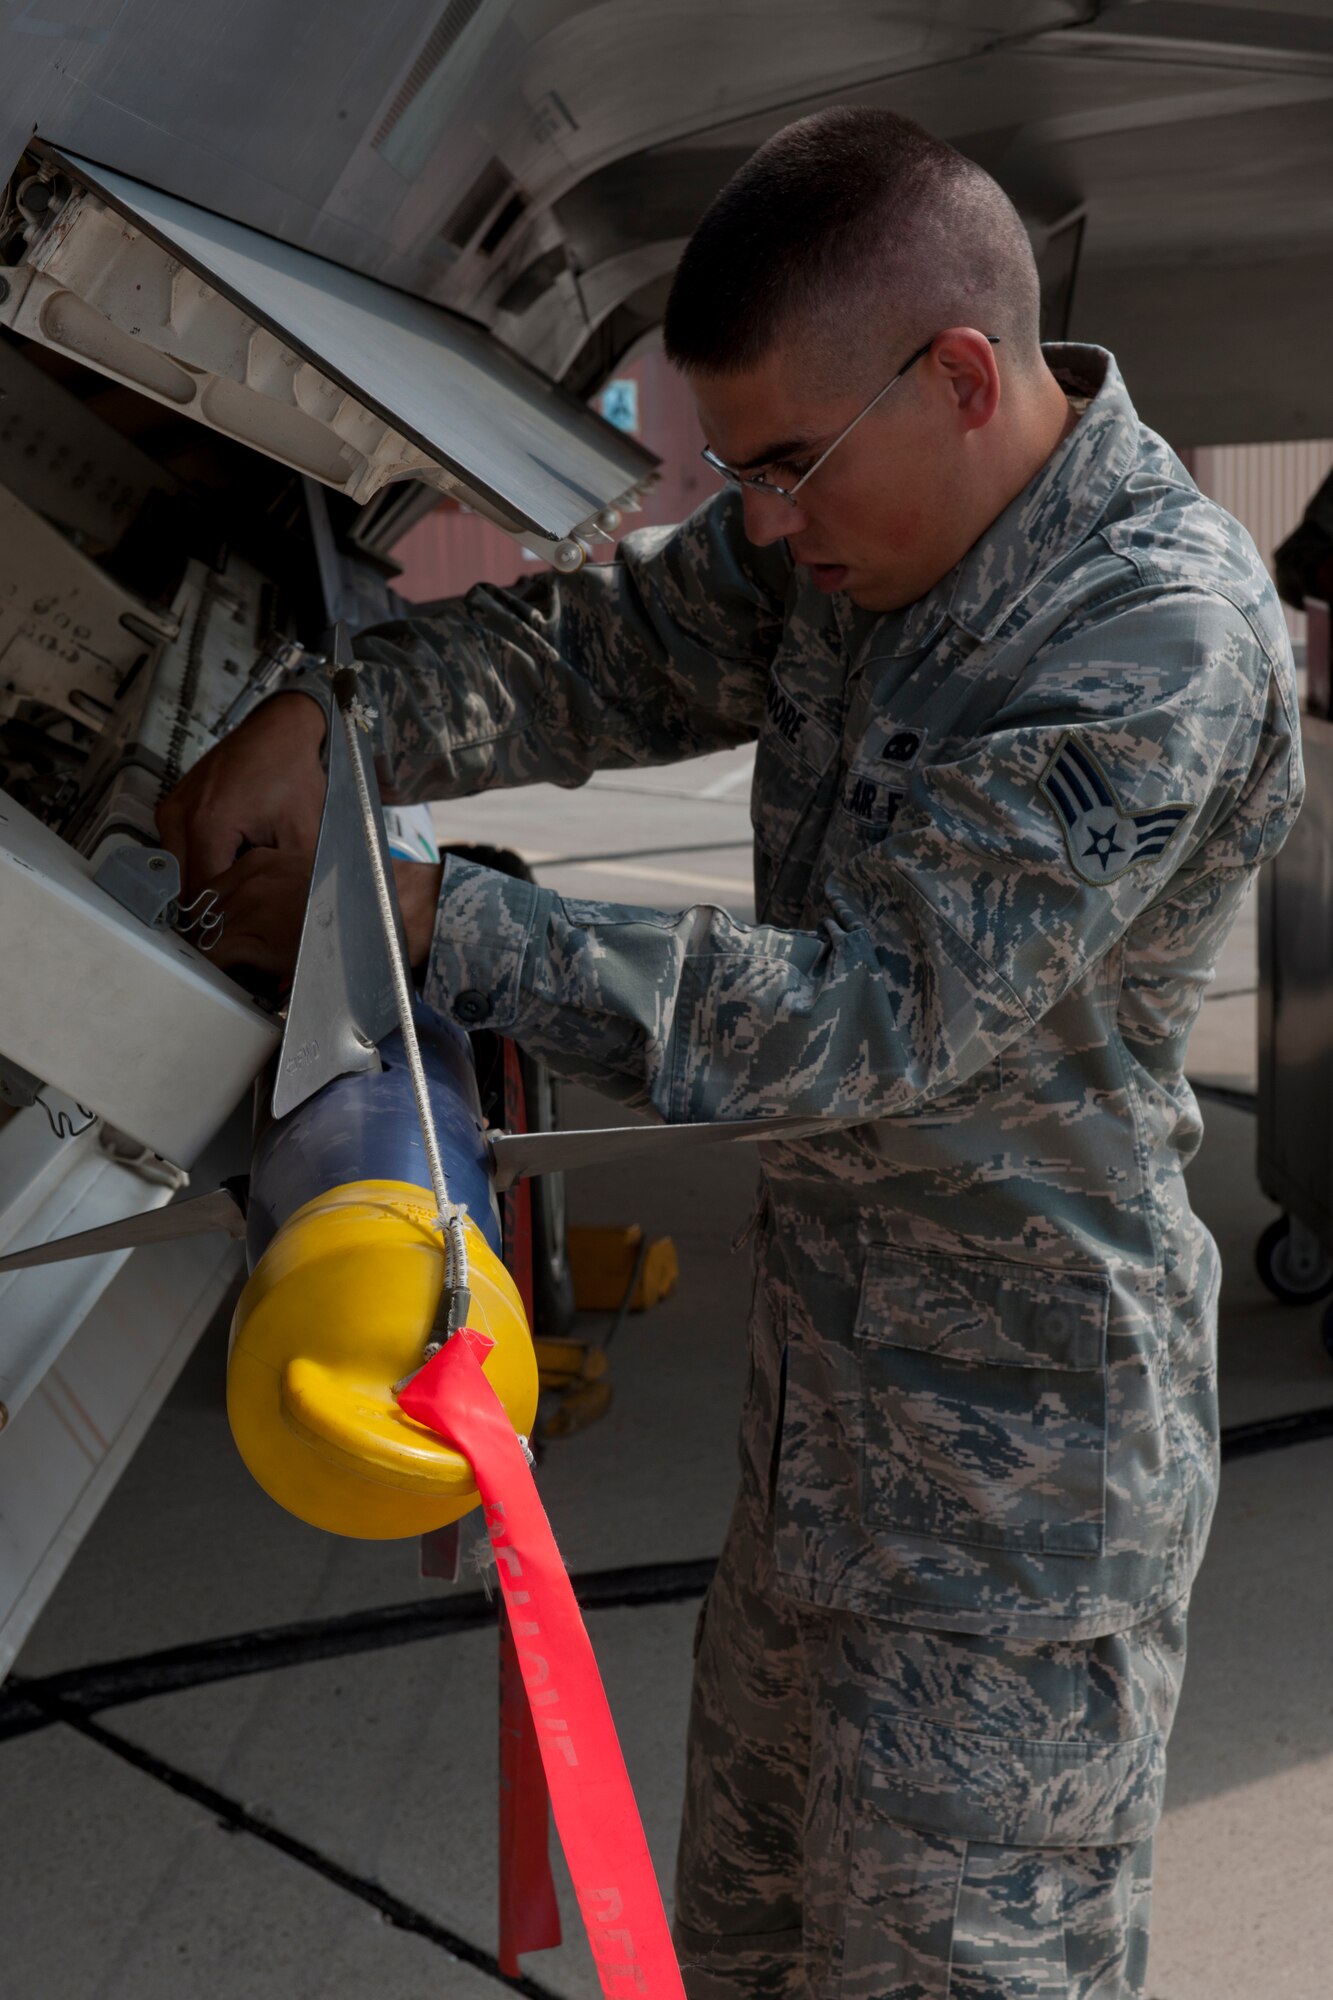 Senior Airman Thomas Moore, 49th Aircraft Maintenance Squadron load team member, attaches a Captive-Air Training Missile AIM- 9L to an F-22 Raptor during a quarterly load-crew competition at Holloman Air Force Base, N.M., July 13. The 49th AMXS load-crew competed in the load-crew competition to have their skills evaluated alongside the German Air Force Tornado and MQ-9 Reaper load crews. (U.S. Air Force photo by Airman 1st Class Michael Shoemaker)